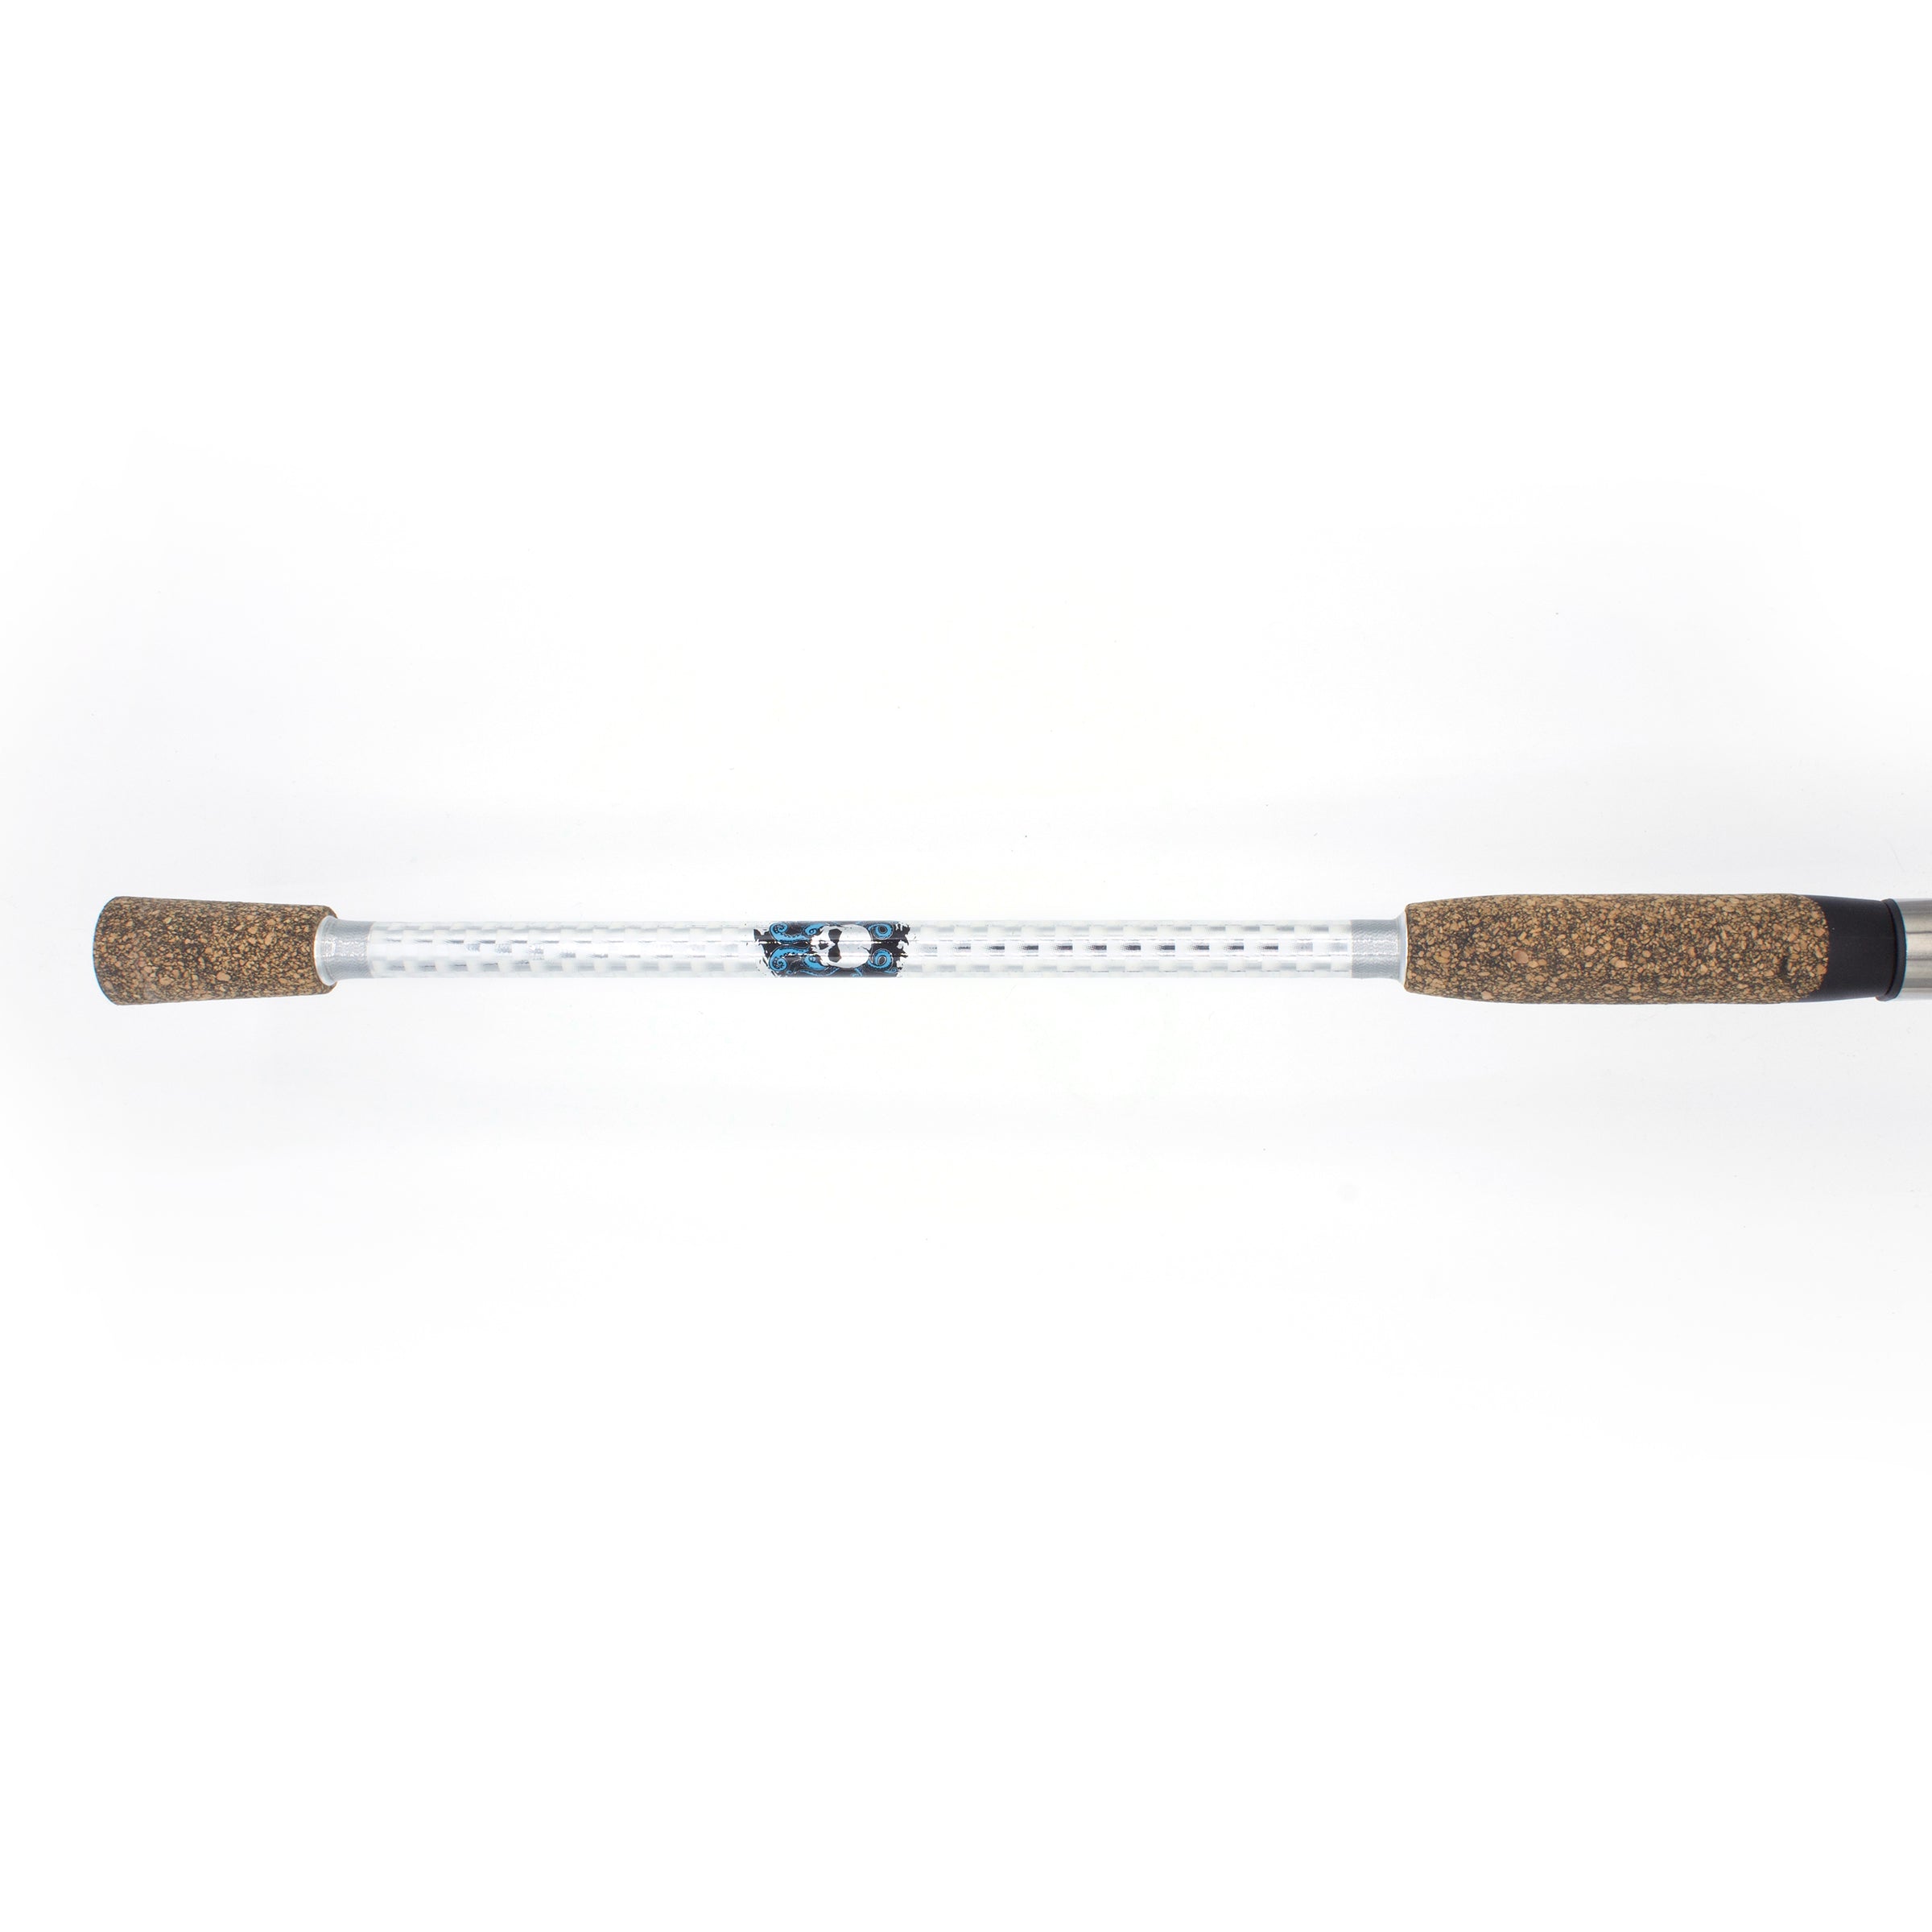 Calico Jack Inshore Spinning Rods